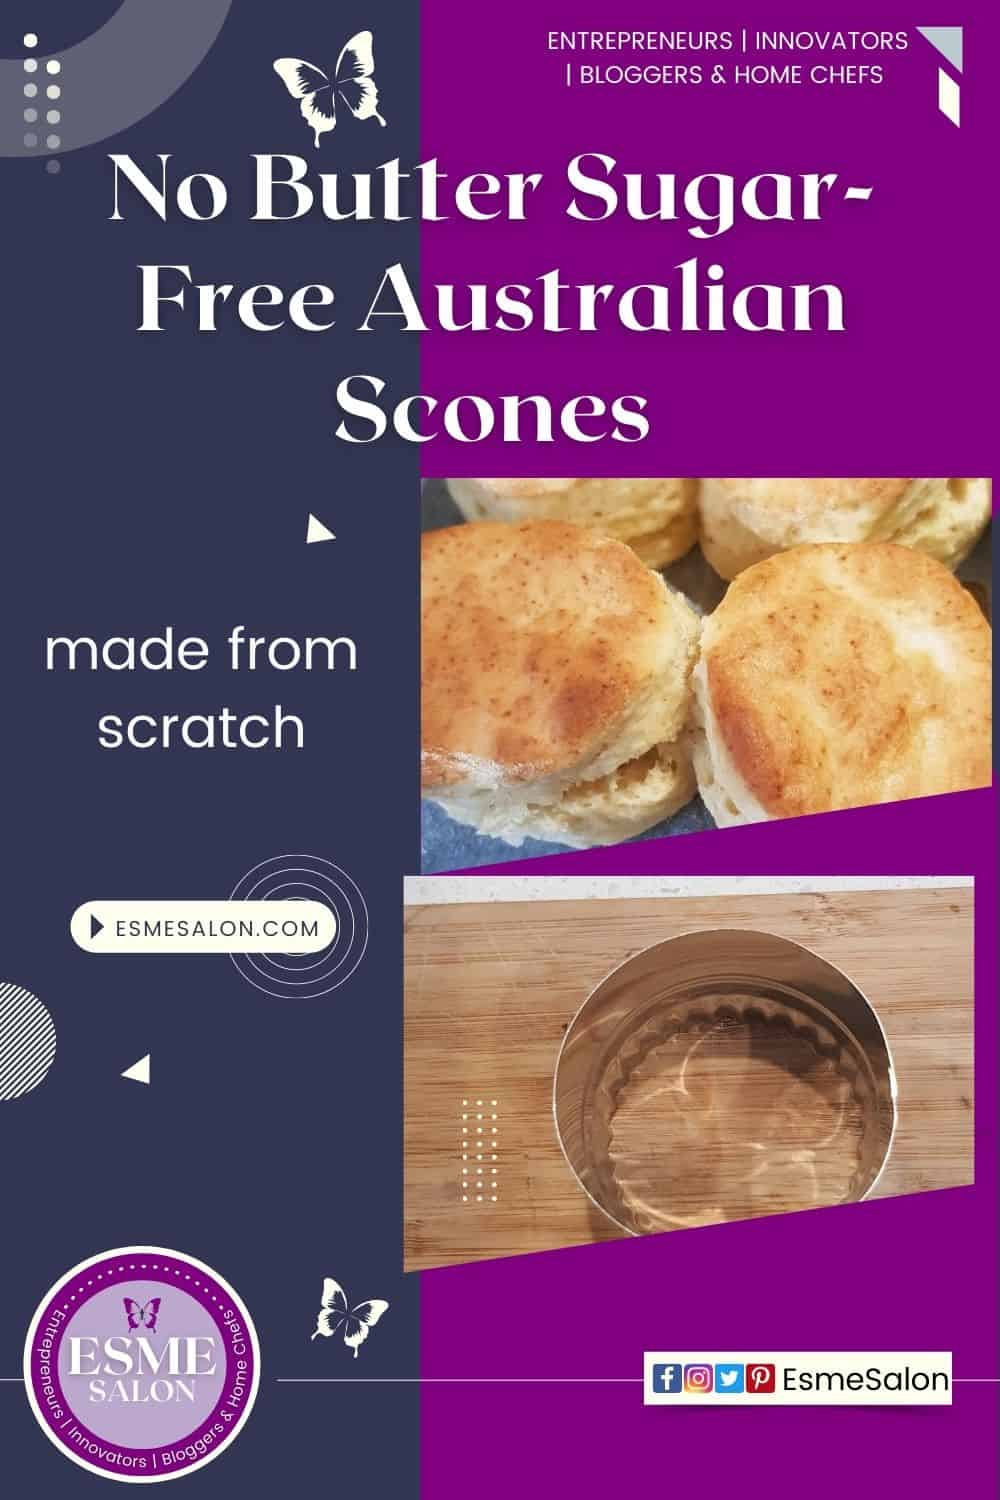 an image of a serving tray with 5 No Butter Sugar-Free Australian Scones